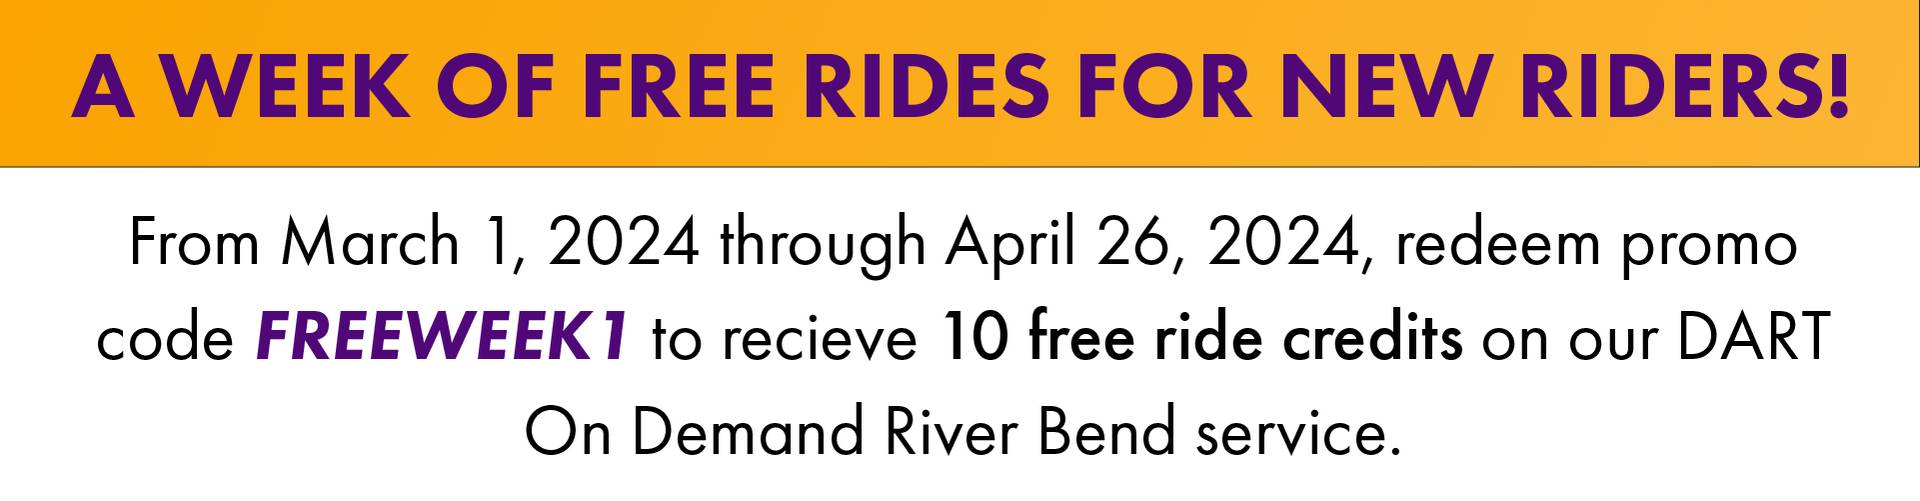 Graphic saying that from March 1, 2024 through April 26, 2024 you can recieve 10 free ride credits on the DART On Demand River Bend service when you use promotional code FREE WEEK and the number one.